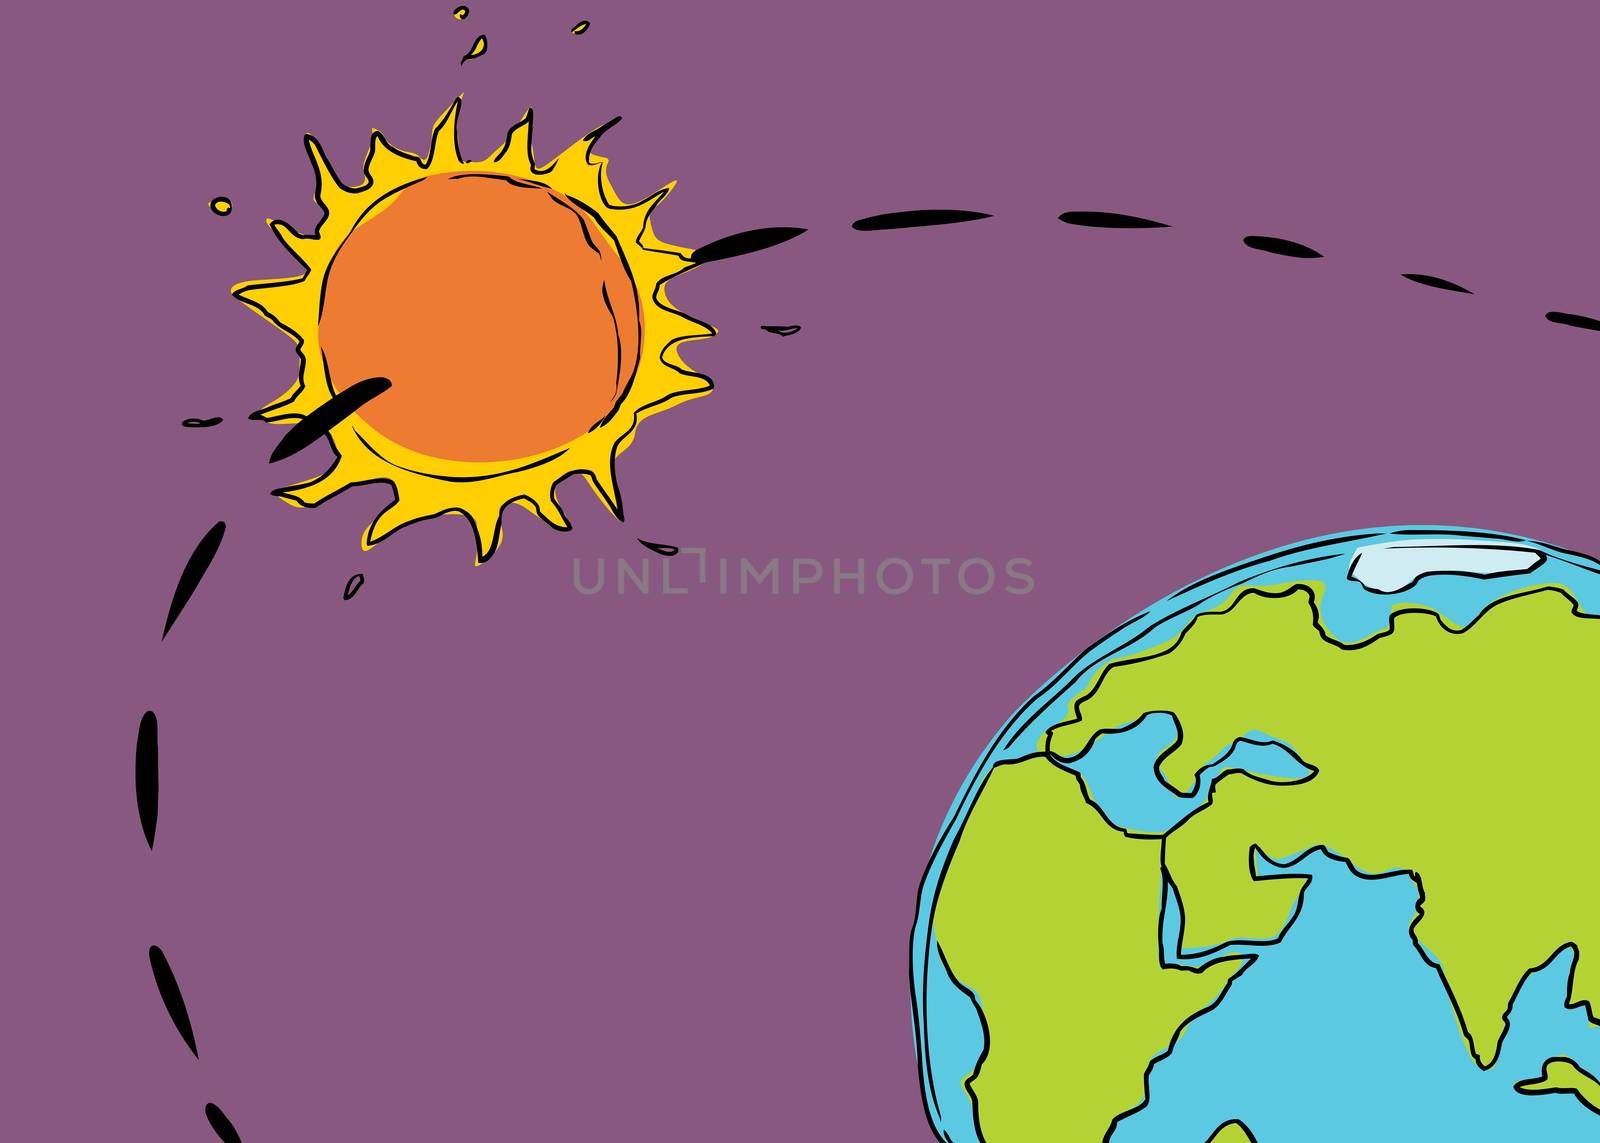 Cartoon of the sun orbiting the planet earth for concept about geocentrism